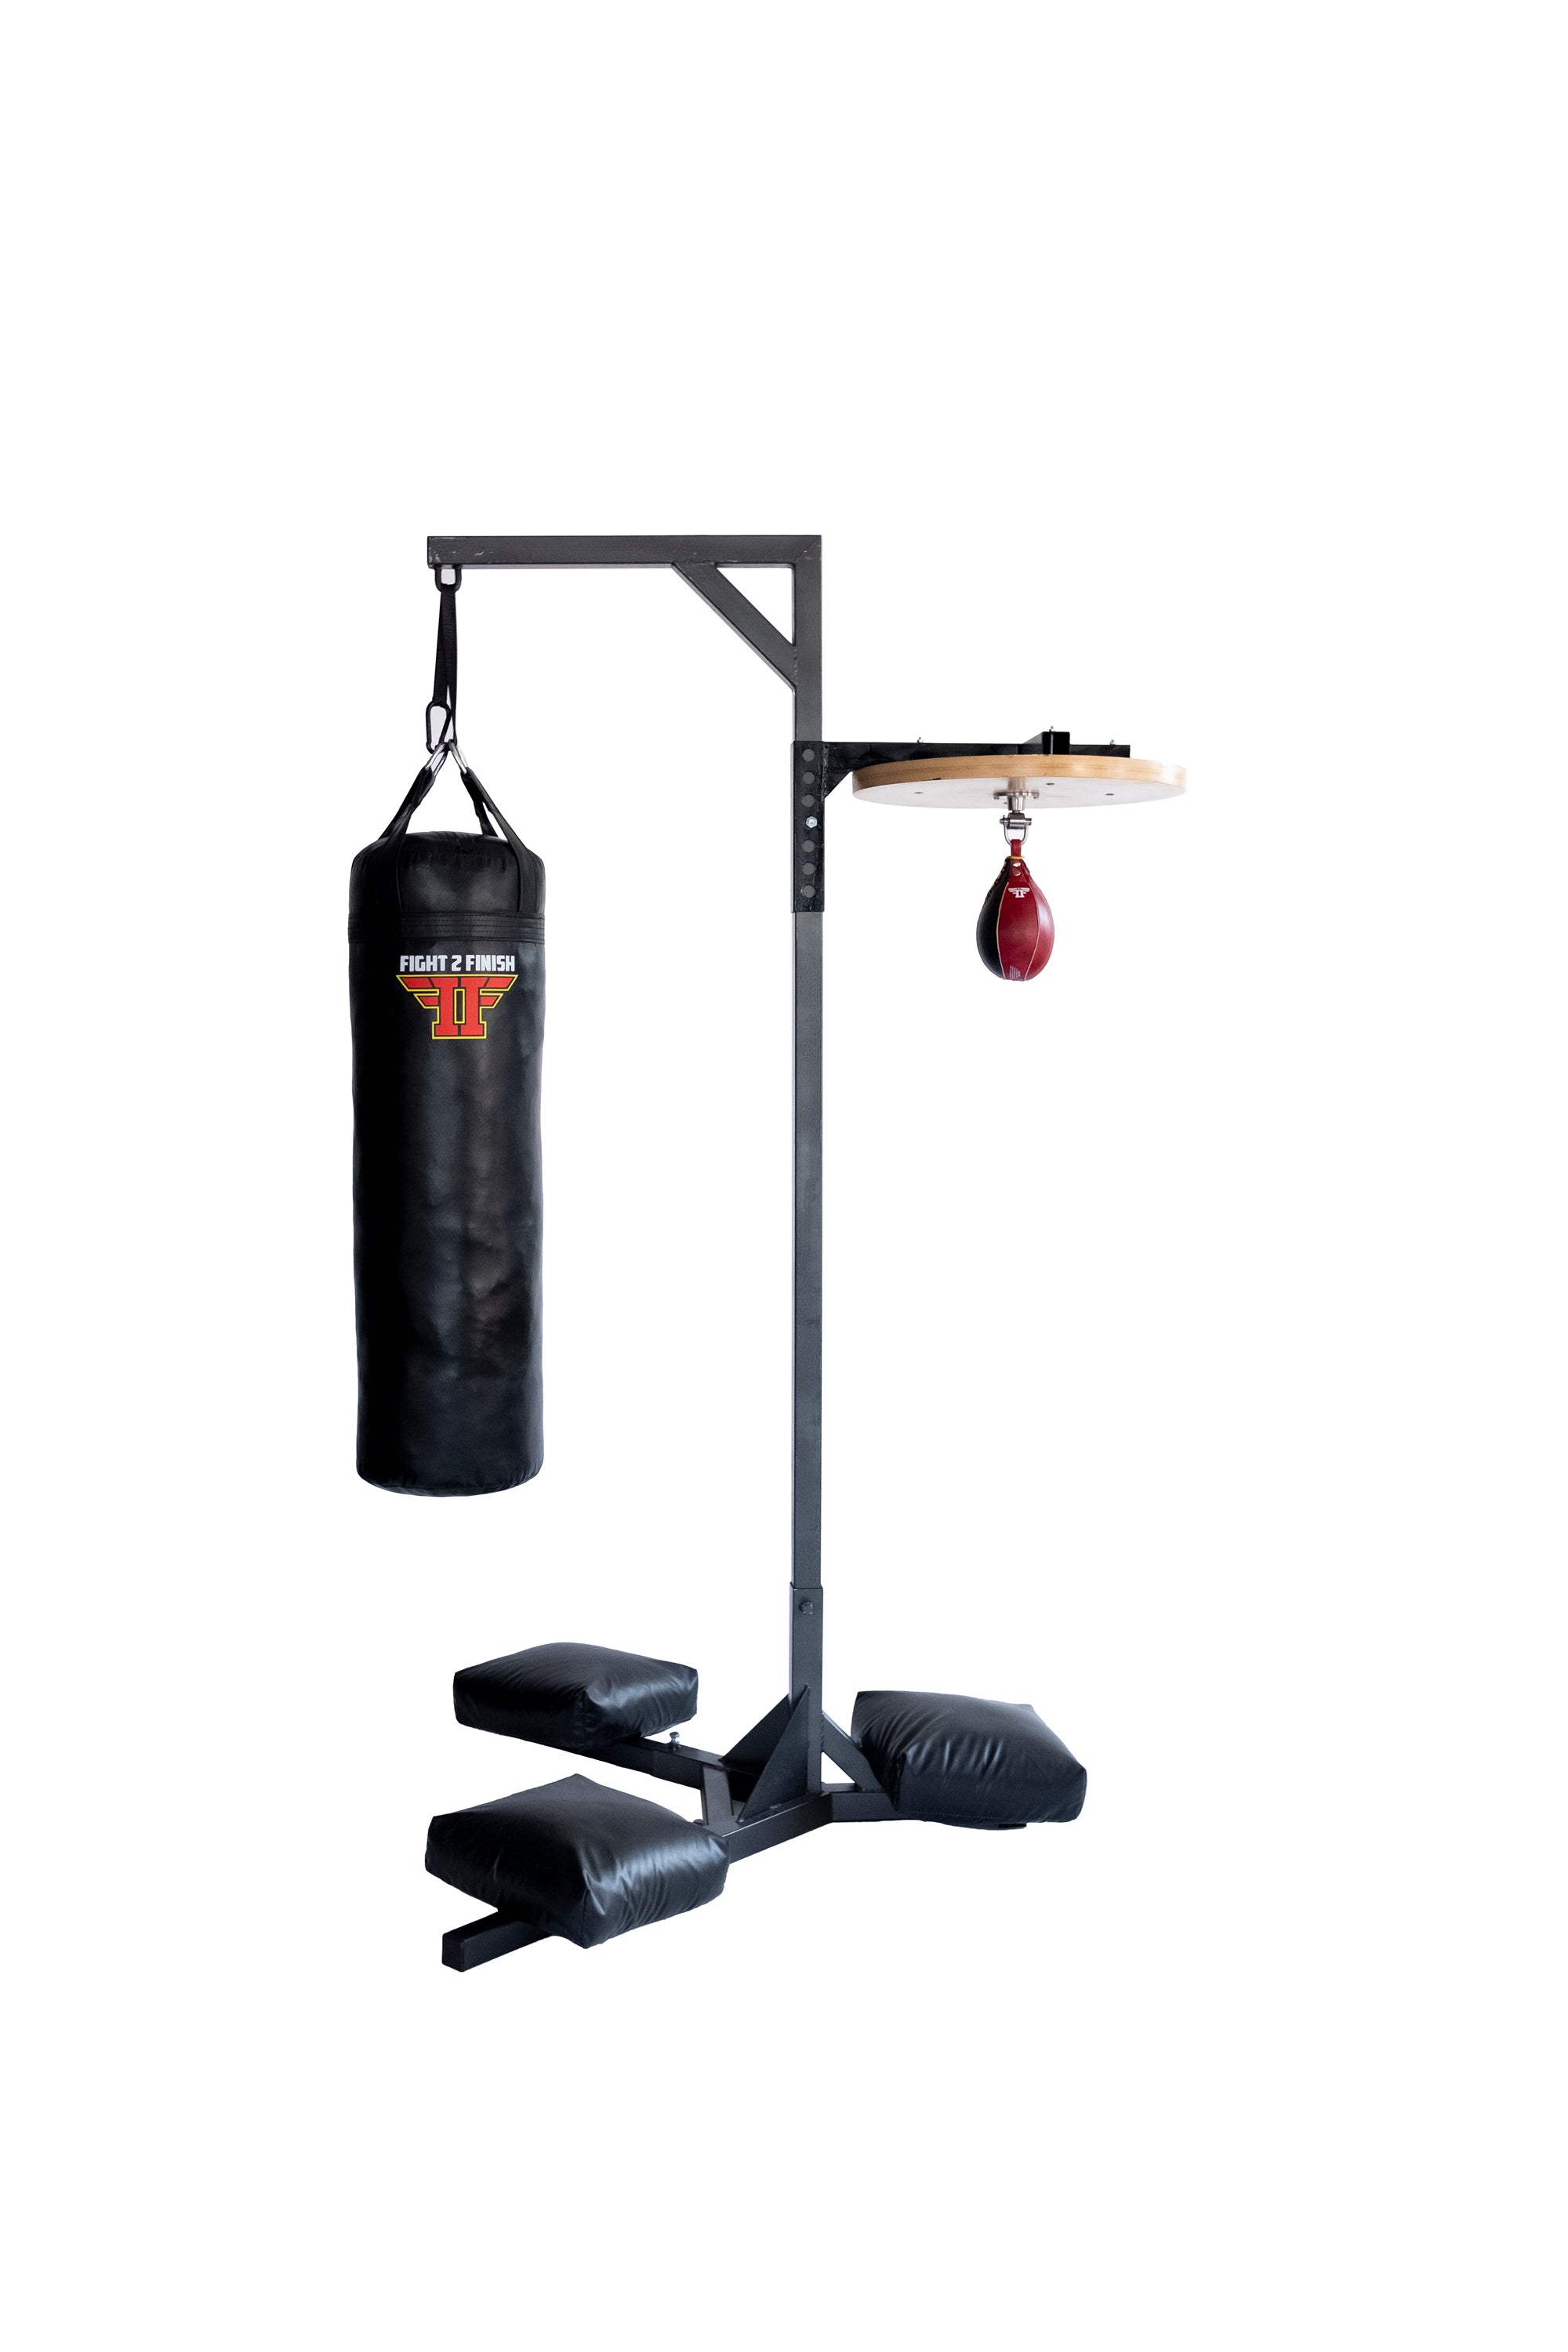 Century Torrent T2 PRO Training Bag, Freestanding Punching Bag for Martial  Arts, Boxing, Cardio Fitness and Combat Sports Workouts - Walmart.com